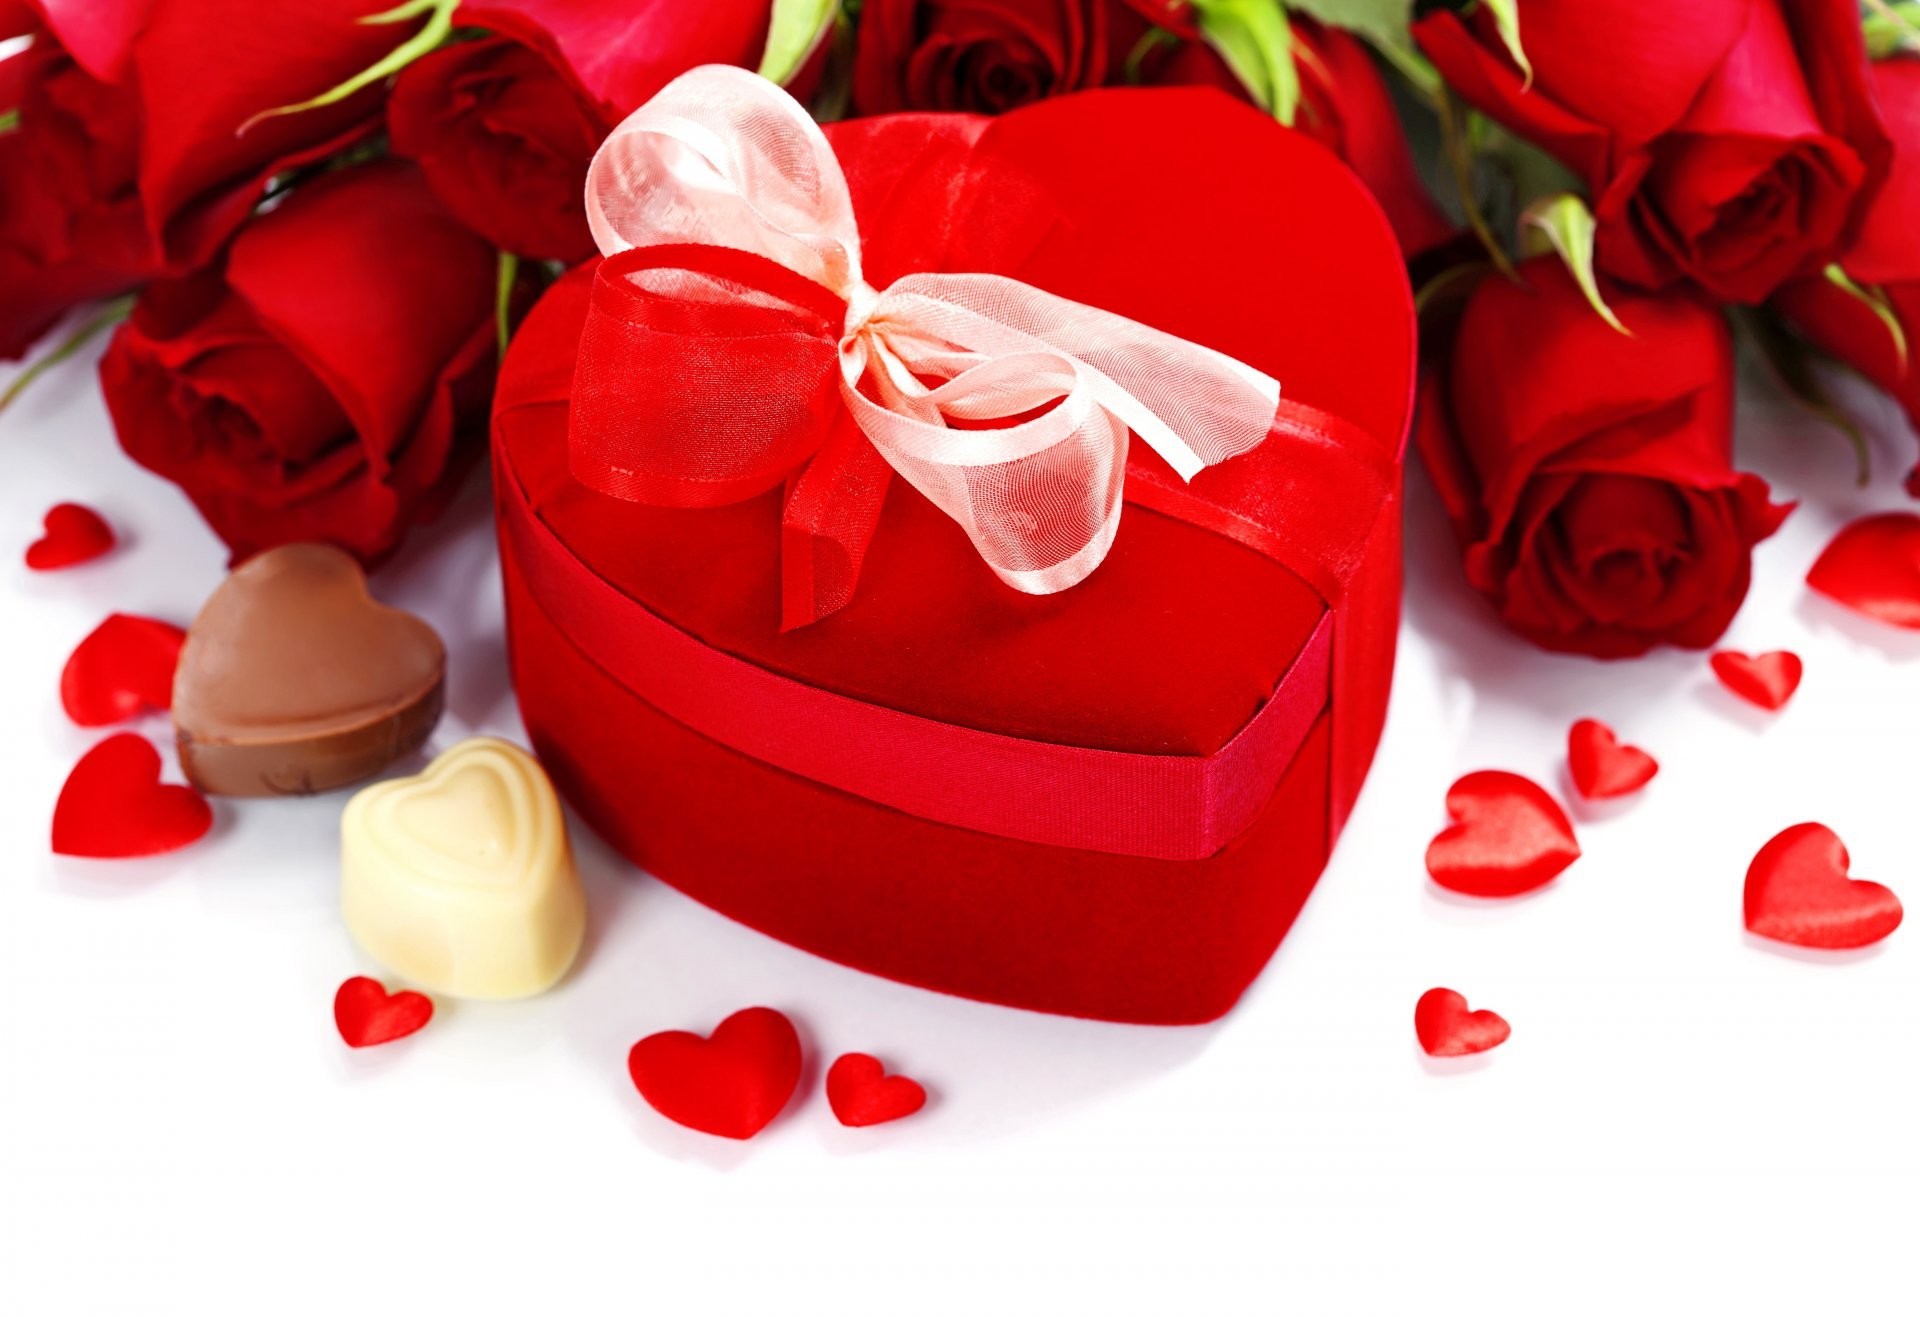 1920x1317 valentine's day love heart romantic roses roses bouquet heart present candy  chocolate